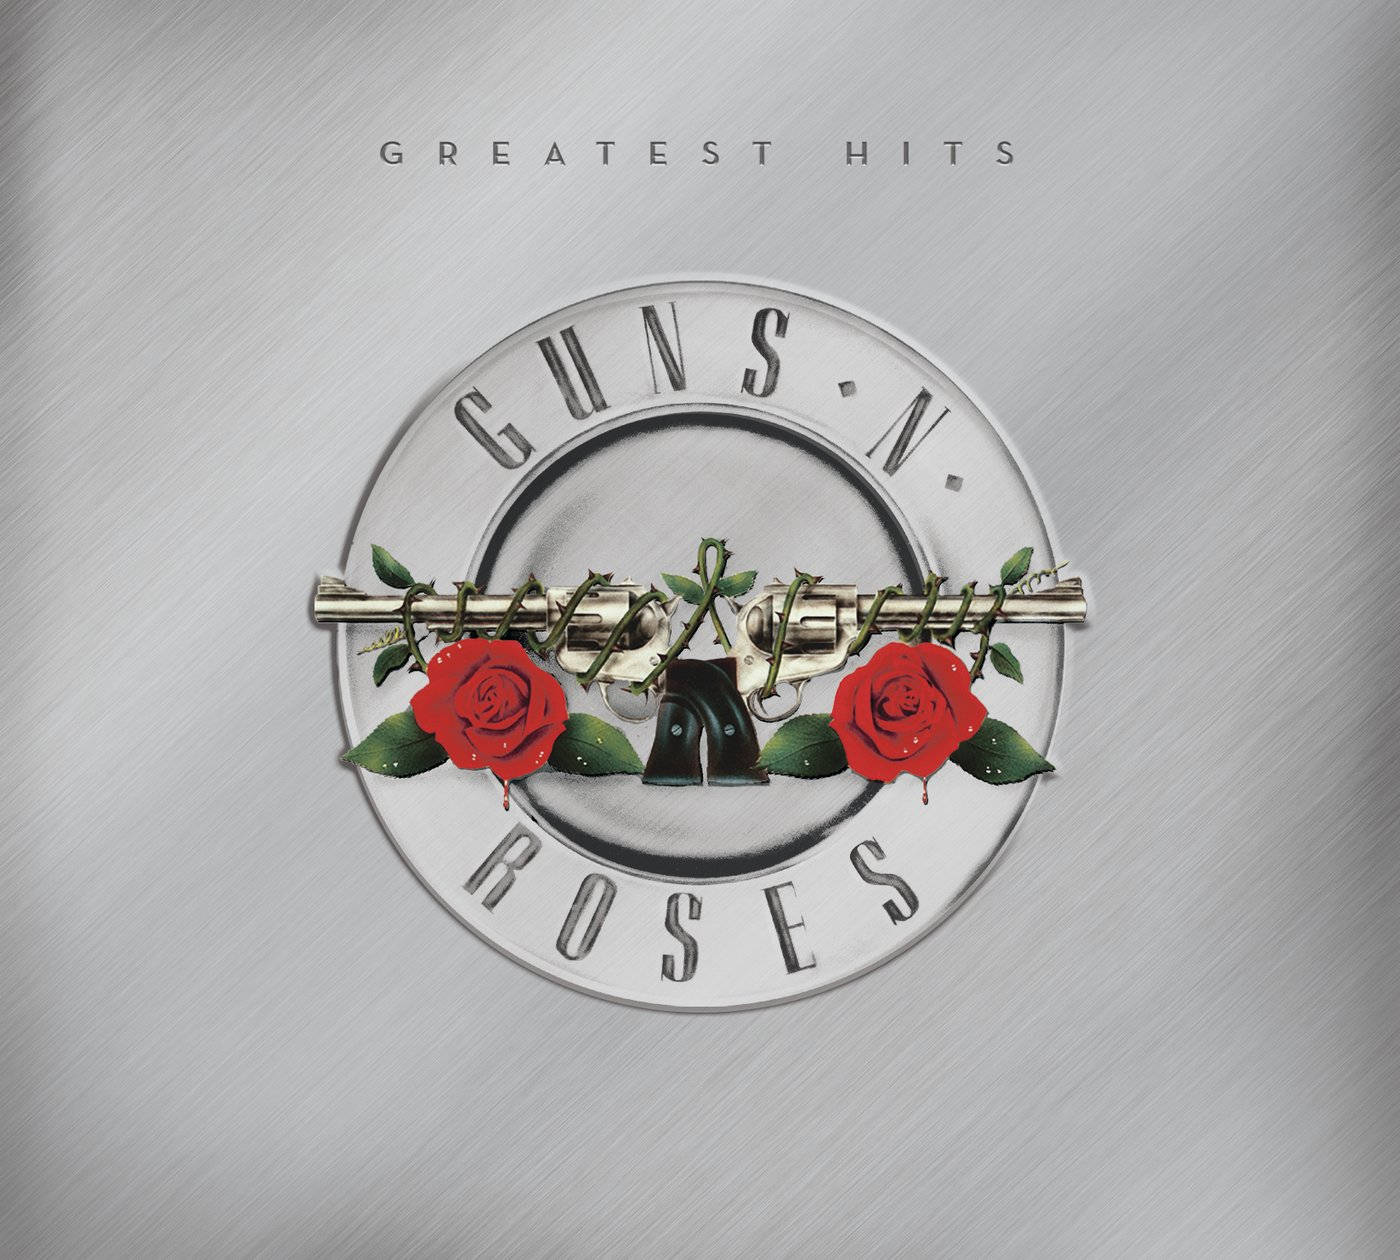 Caption: Iconic Guns N' Roses Greatest Hits Album Cover Wallpaper